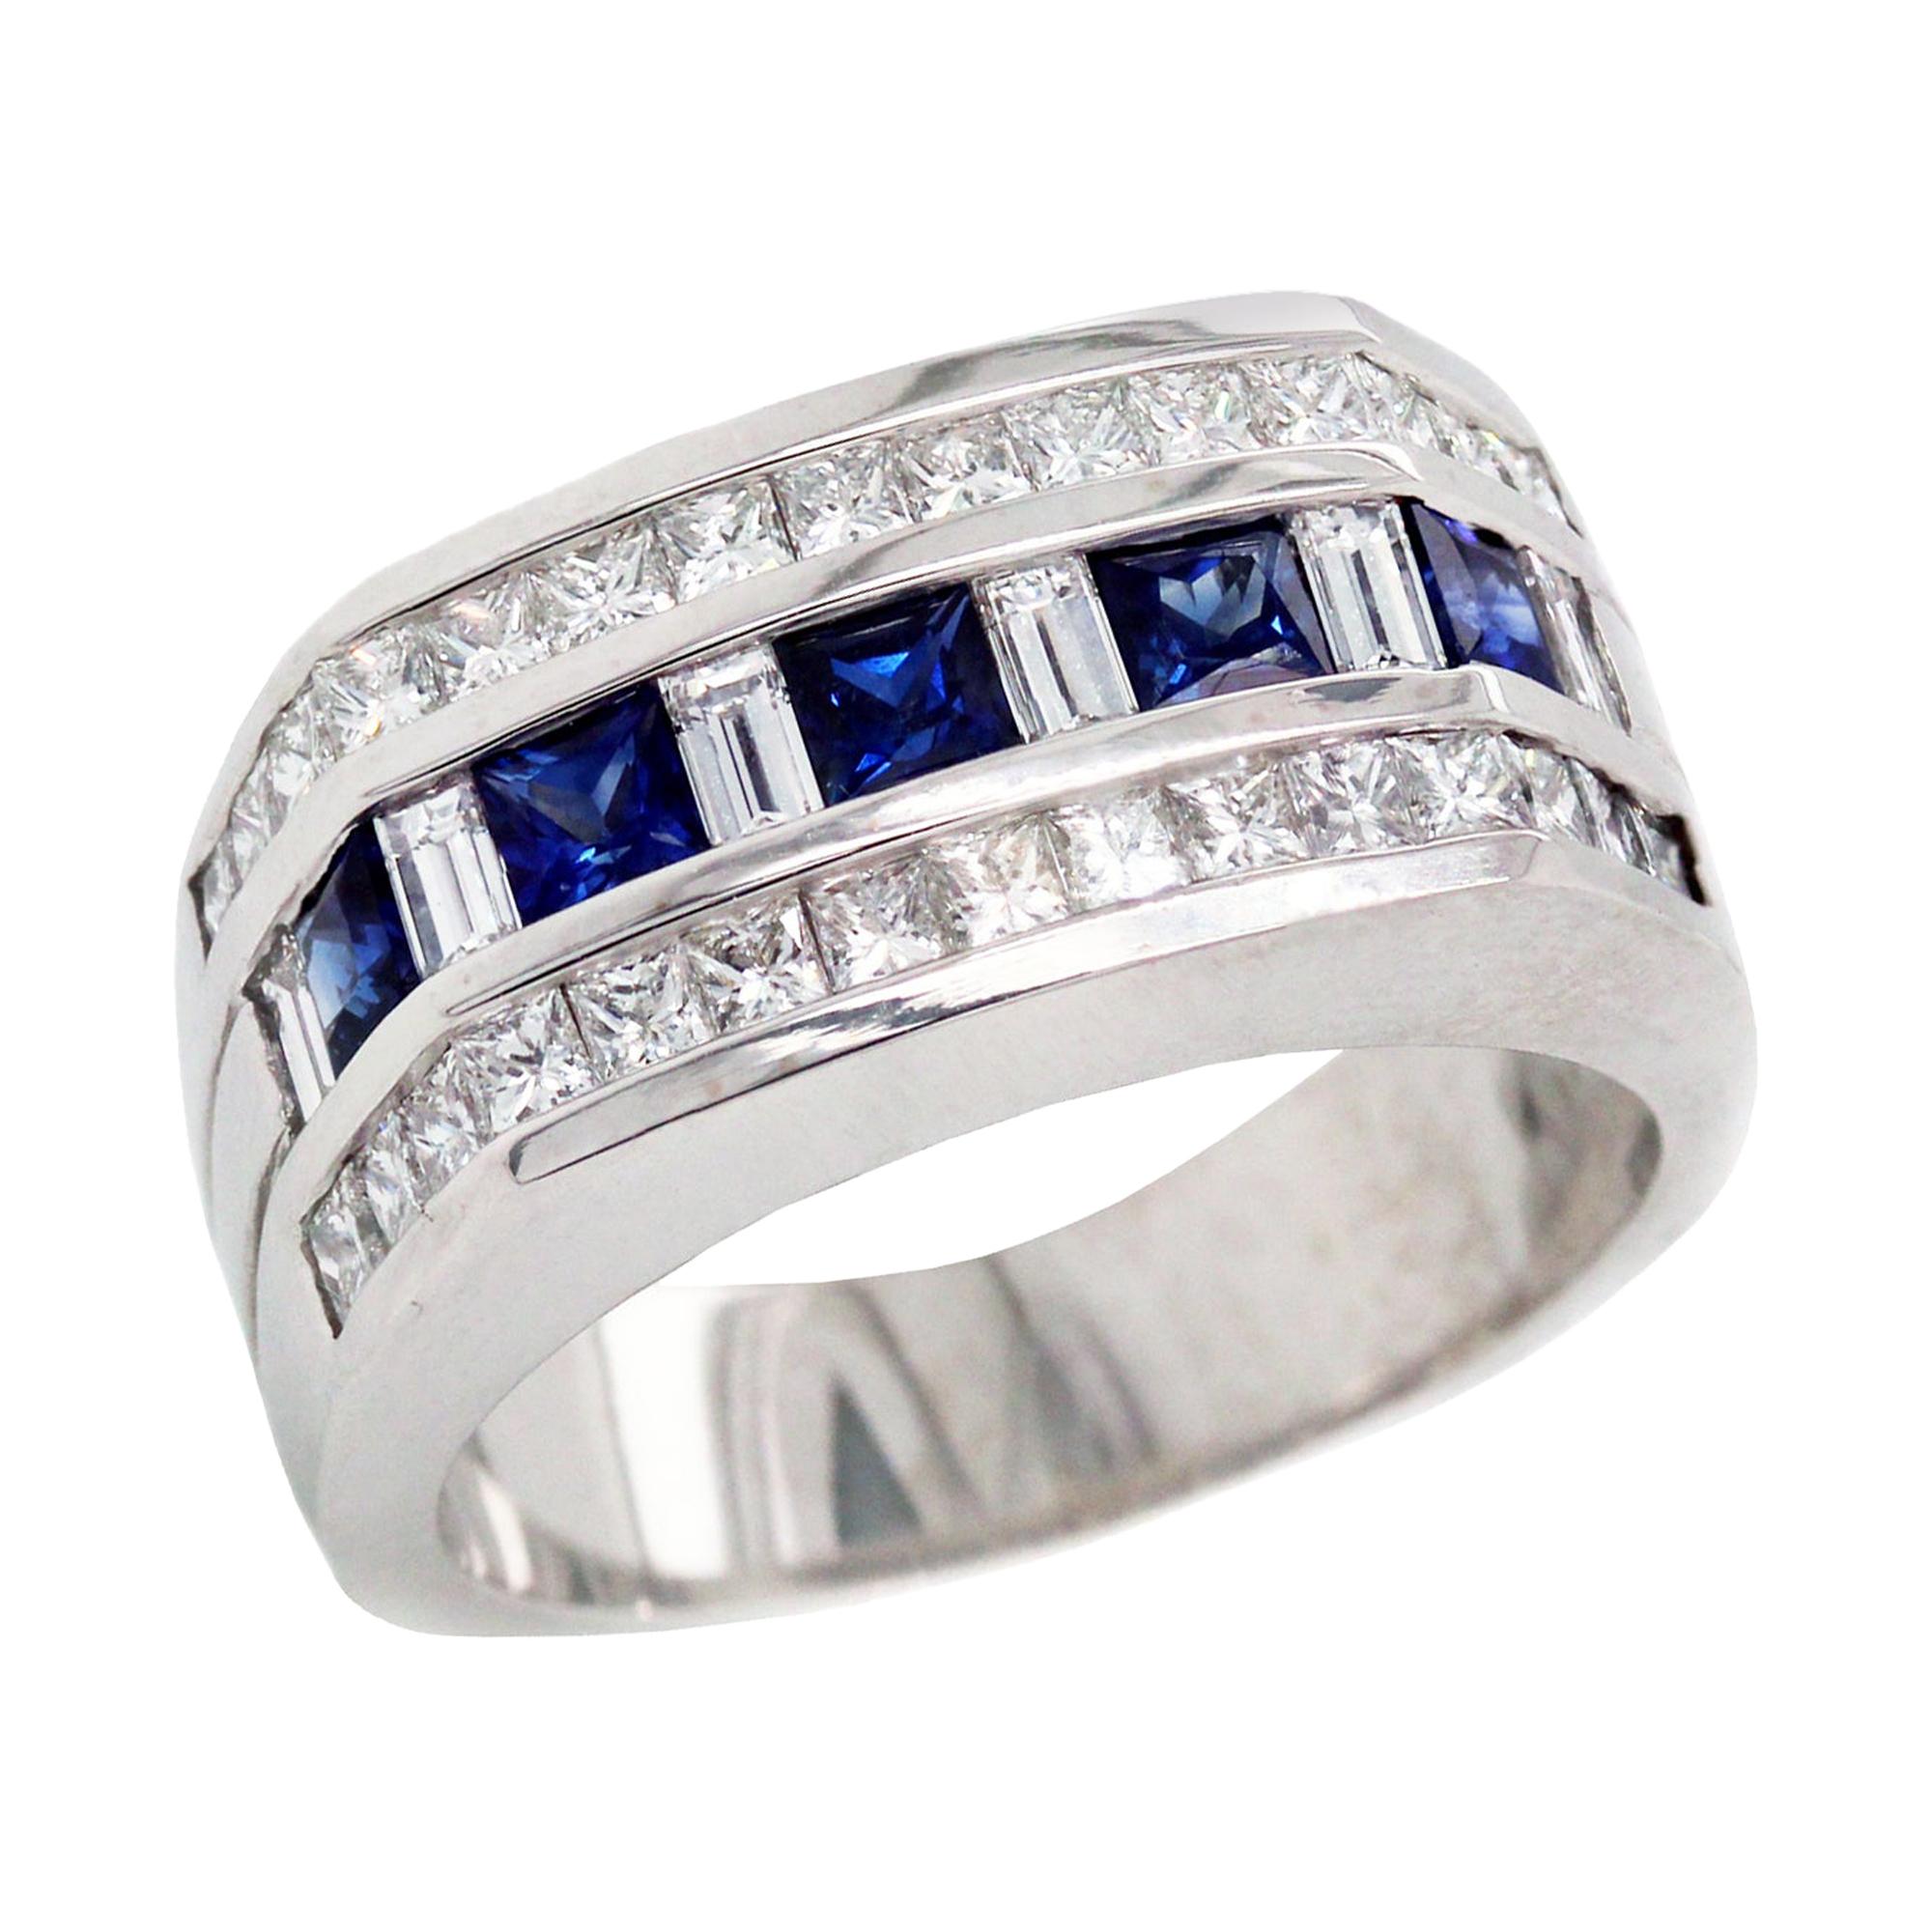 Sapphire diamond ring white gold - loafrican